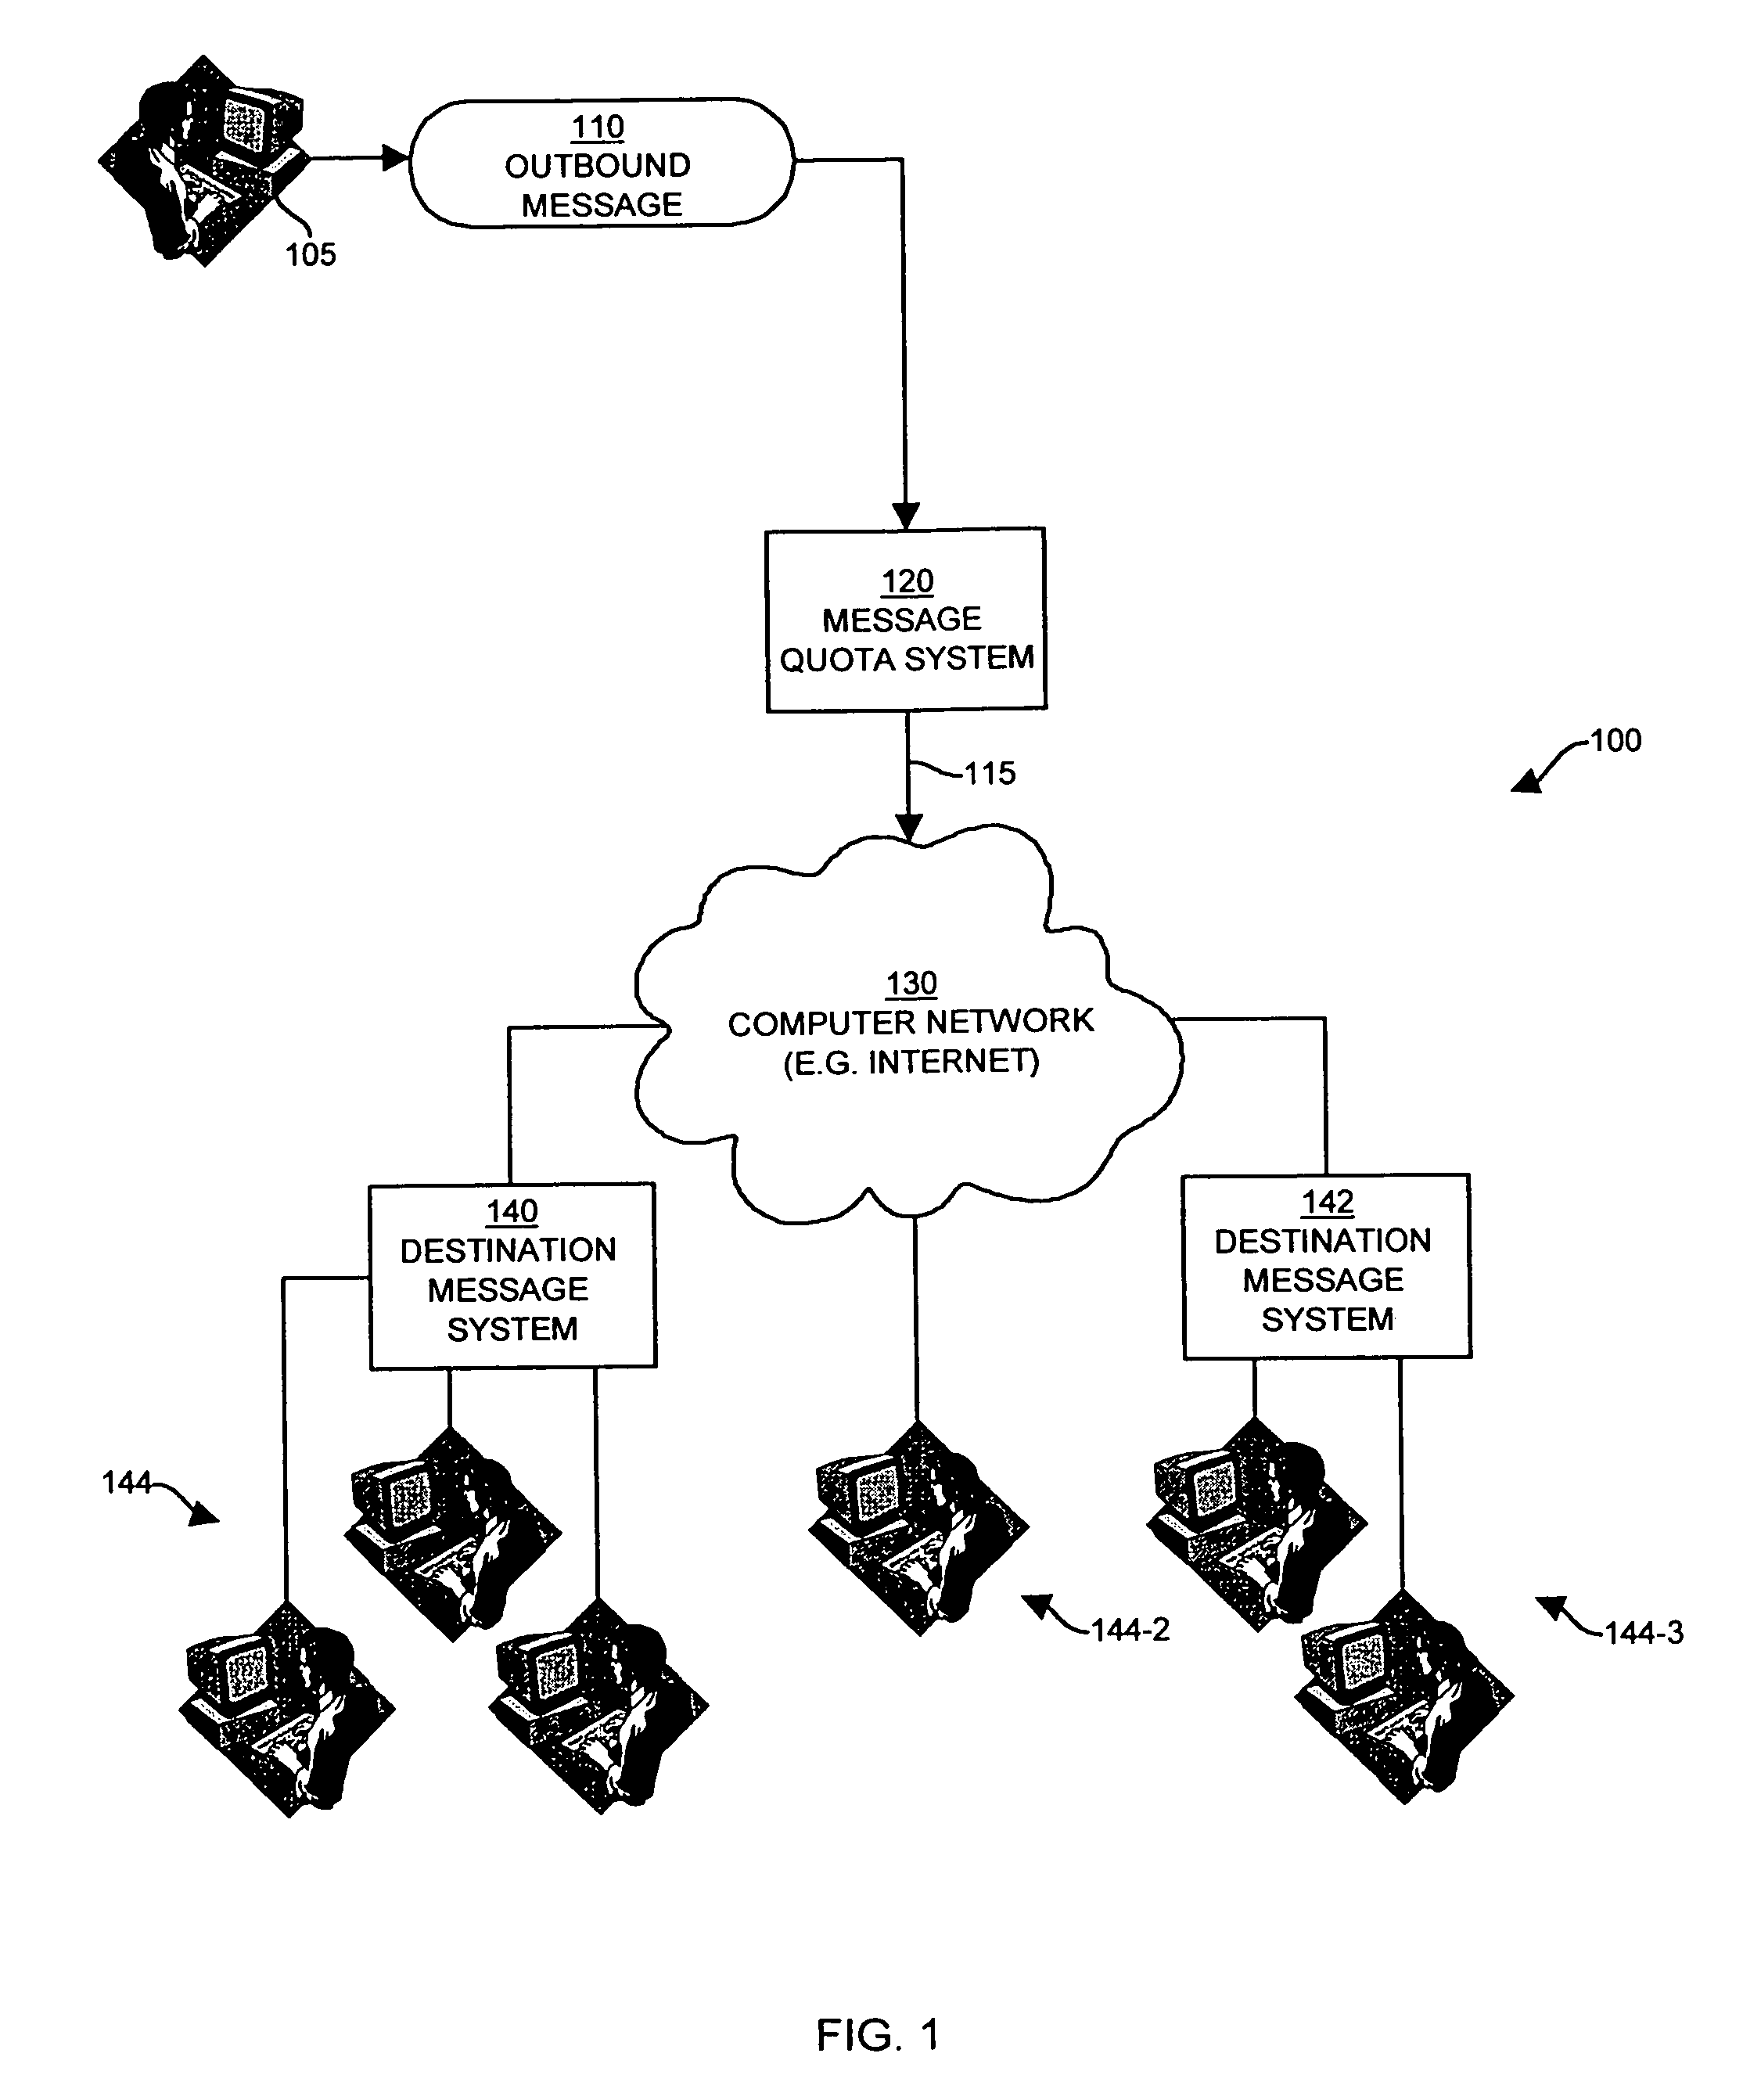 Apparatus and methods for controlling the transmission of messages